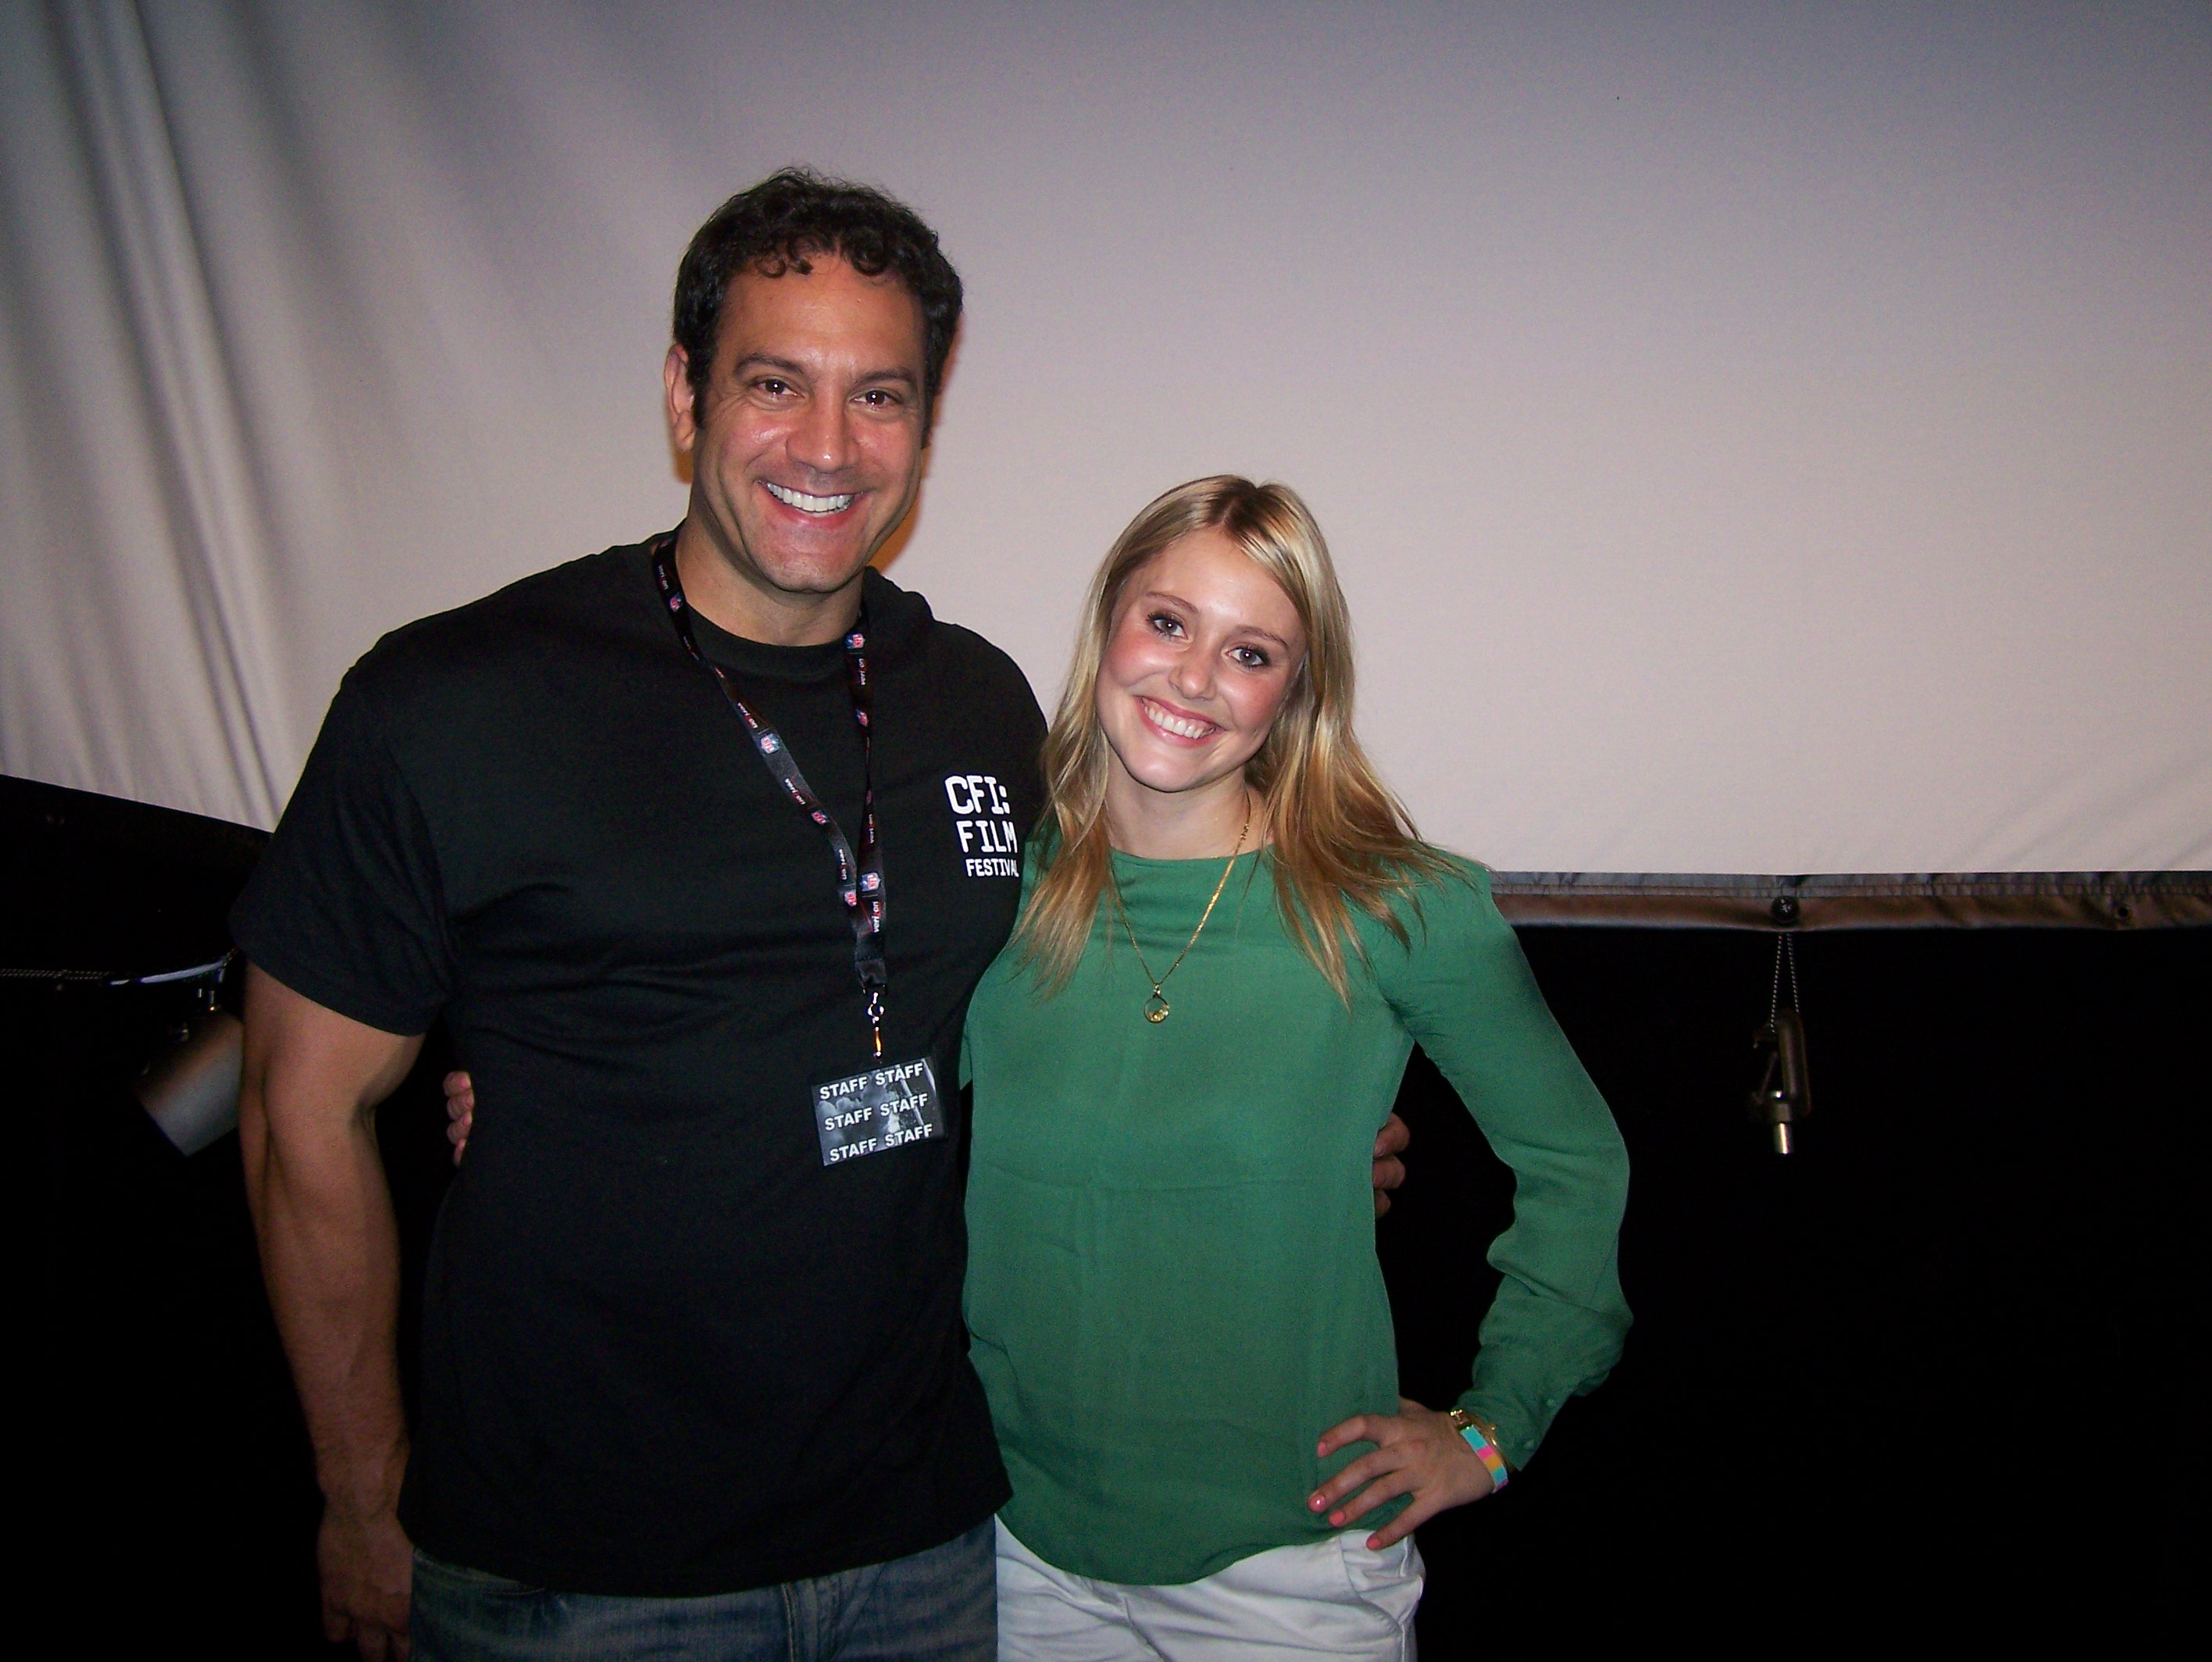 Marcus Chavez and Julianna Guill at Cape Fear Independent Film Festival. Wilmington, NC.